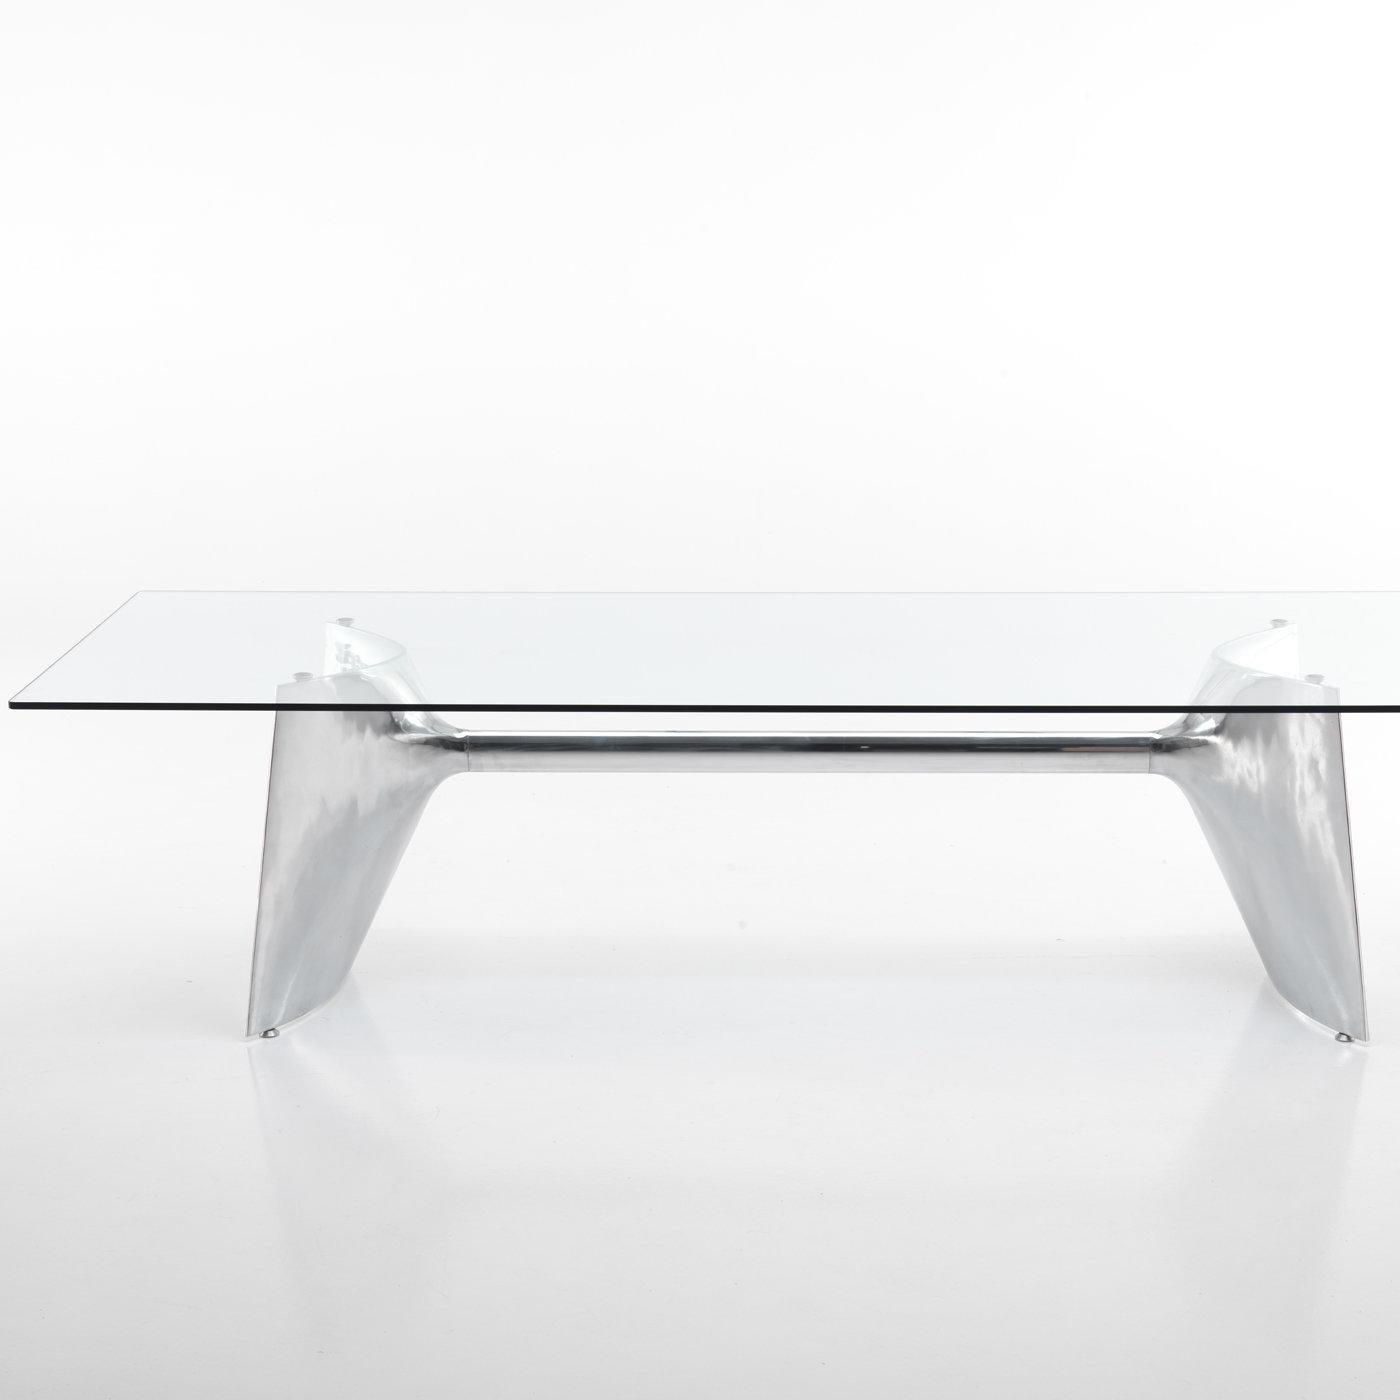 Designed by Jeff Miller, this elegant table showcases a stunning combination of materials that will enliven a modern dining room with shimmering style. The rectangular top is fashioned of extra-clear tempered glass that allows full view of the